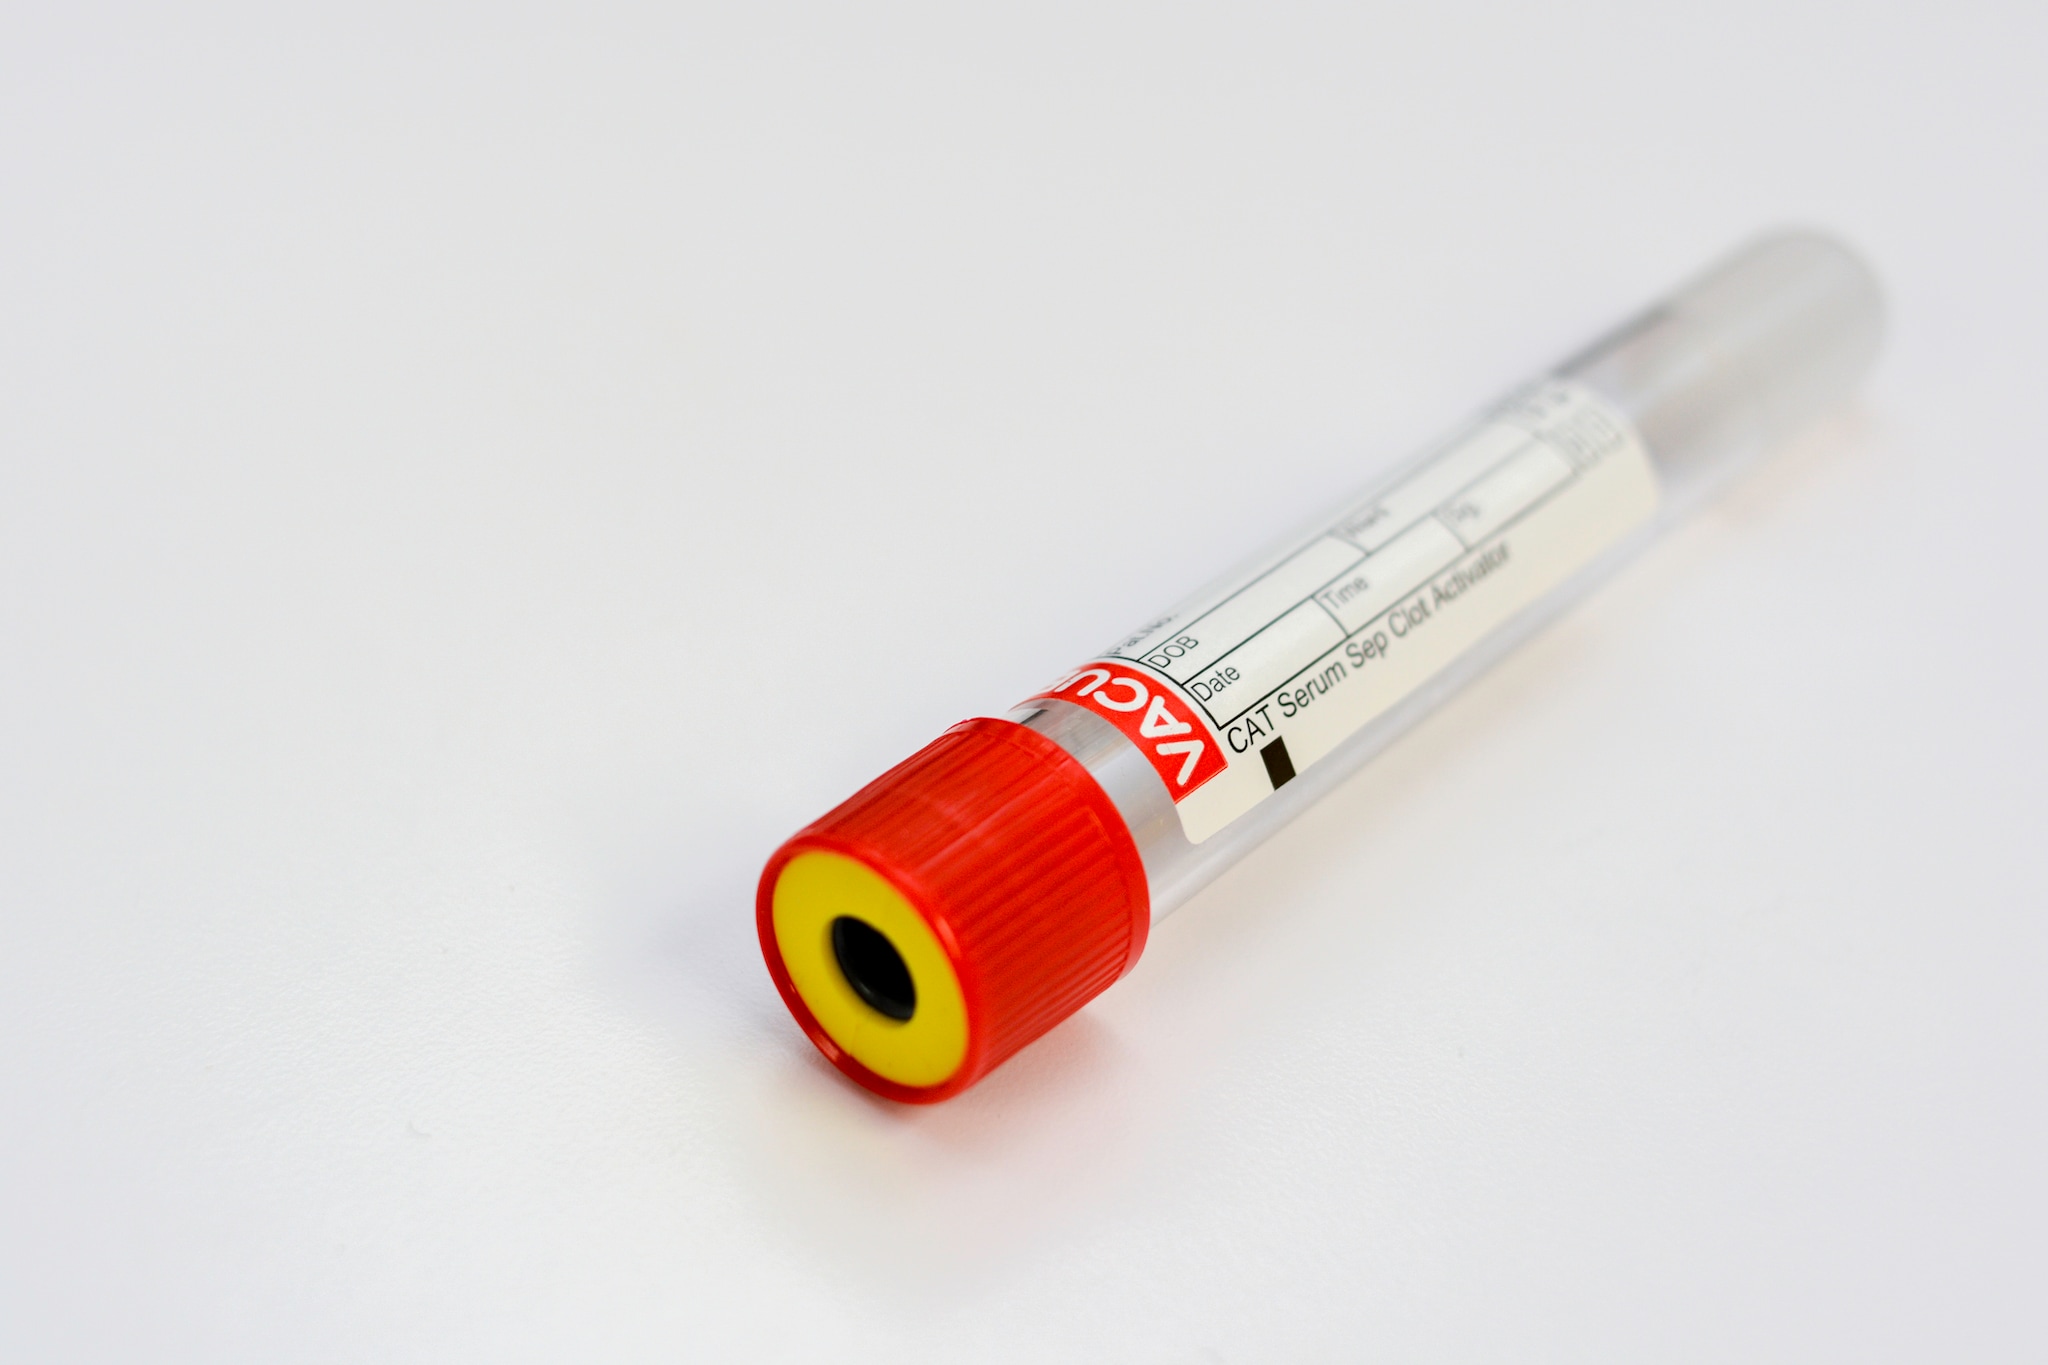 Collection tube with a red cap